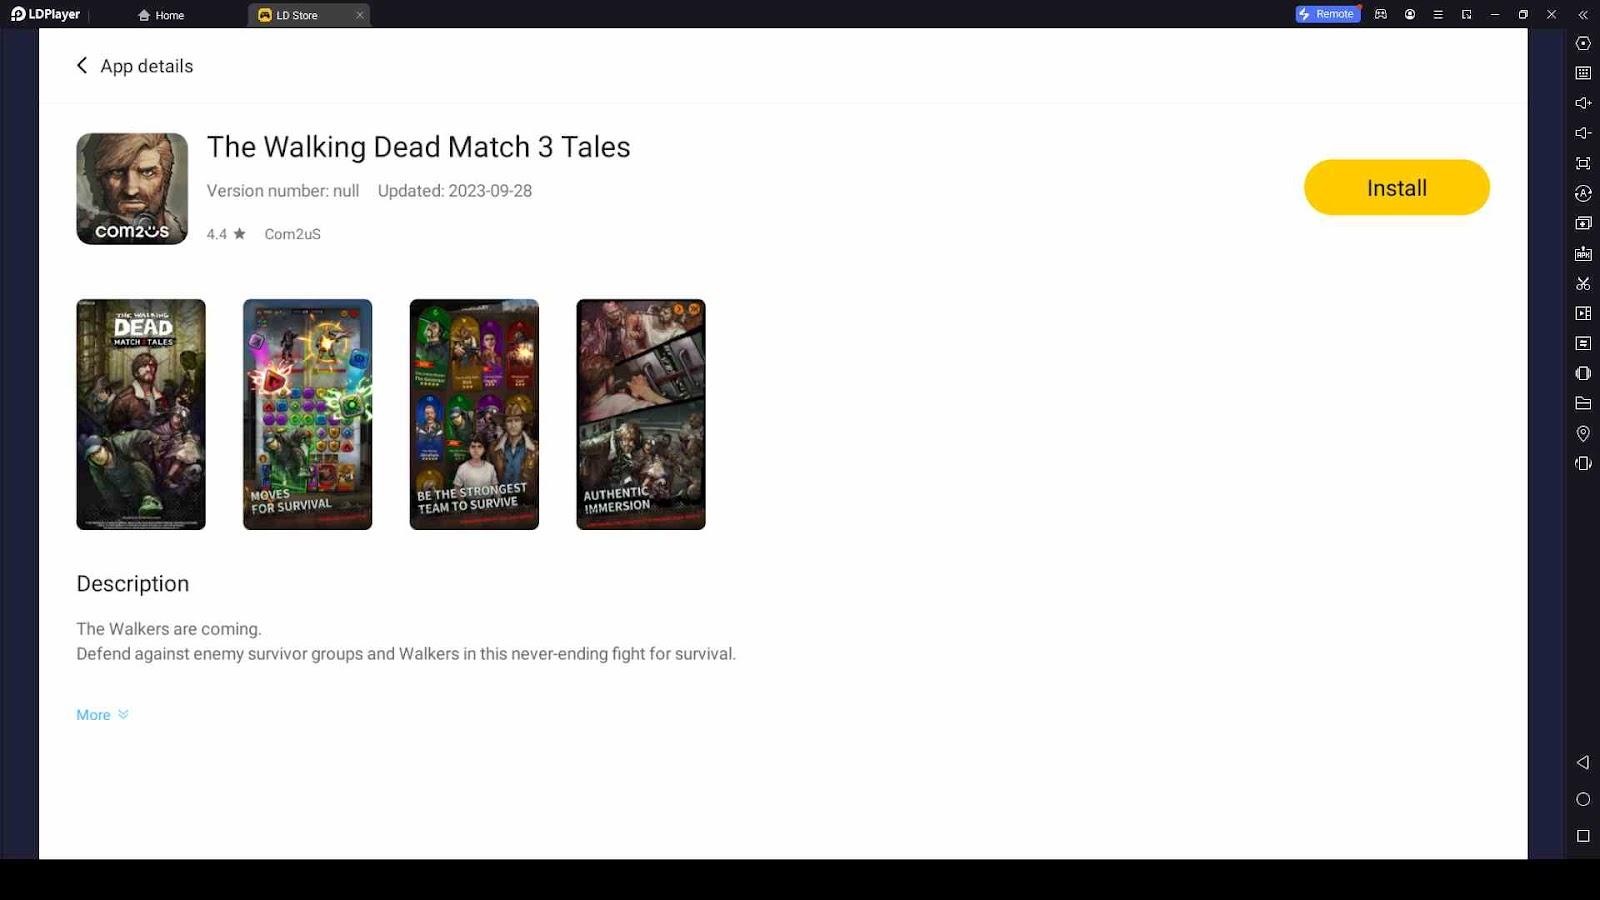 Using LDPlayer 9 for The Walking Dead Match 3 Tales Reroll